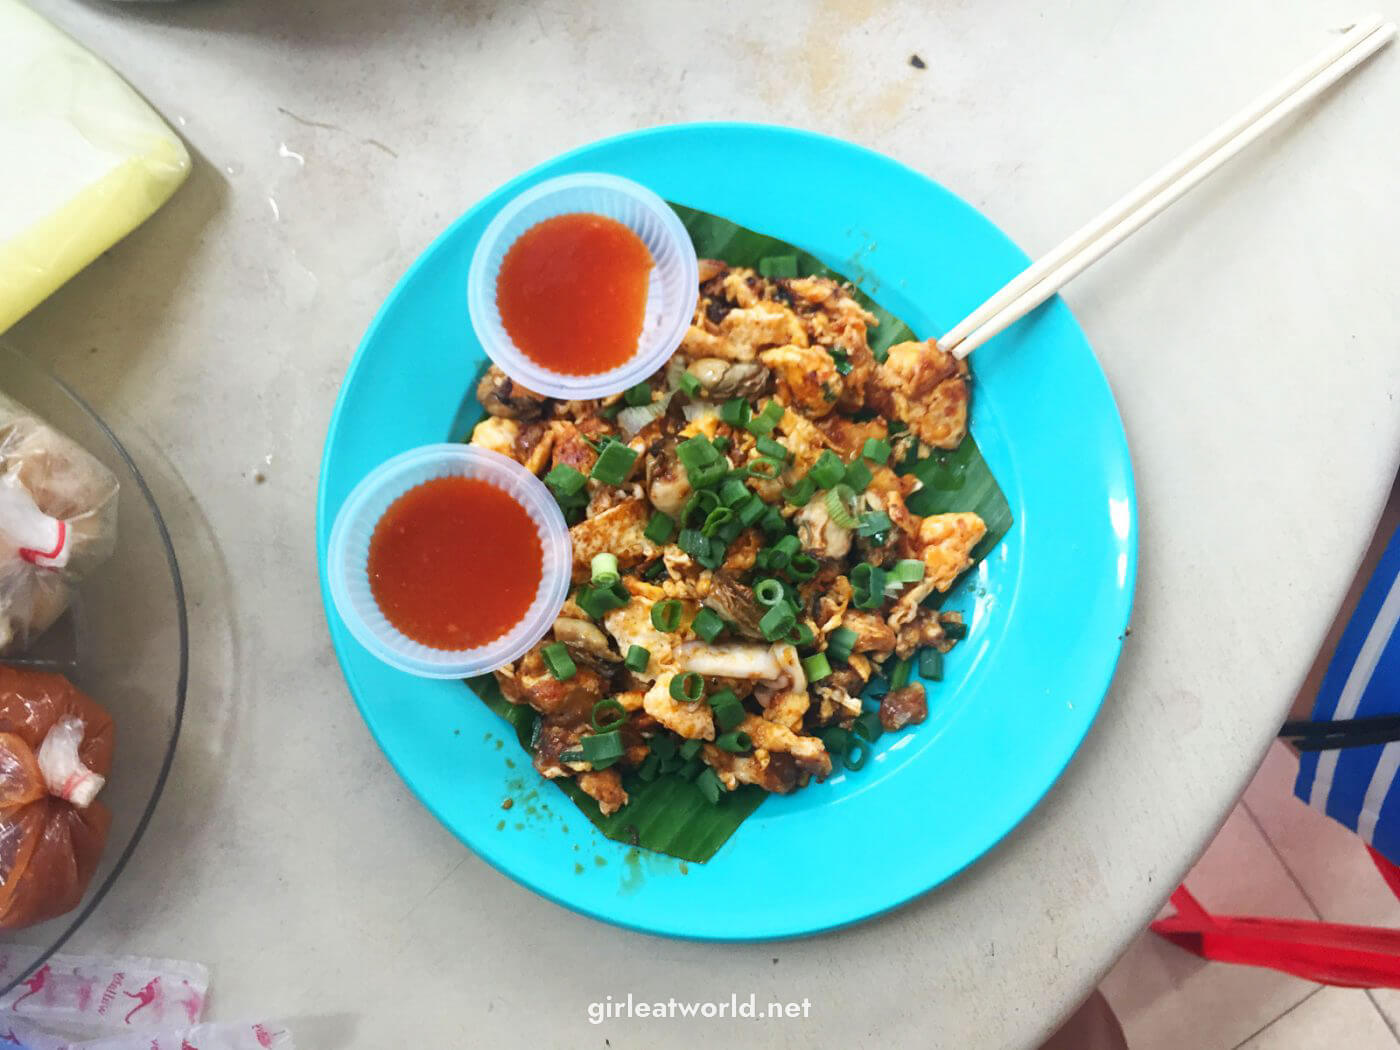 Penang Food Guide - Oyster Omelette at Lorong Selamat